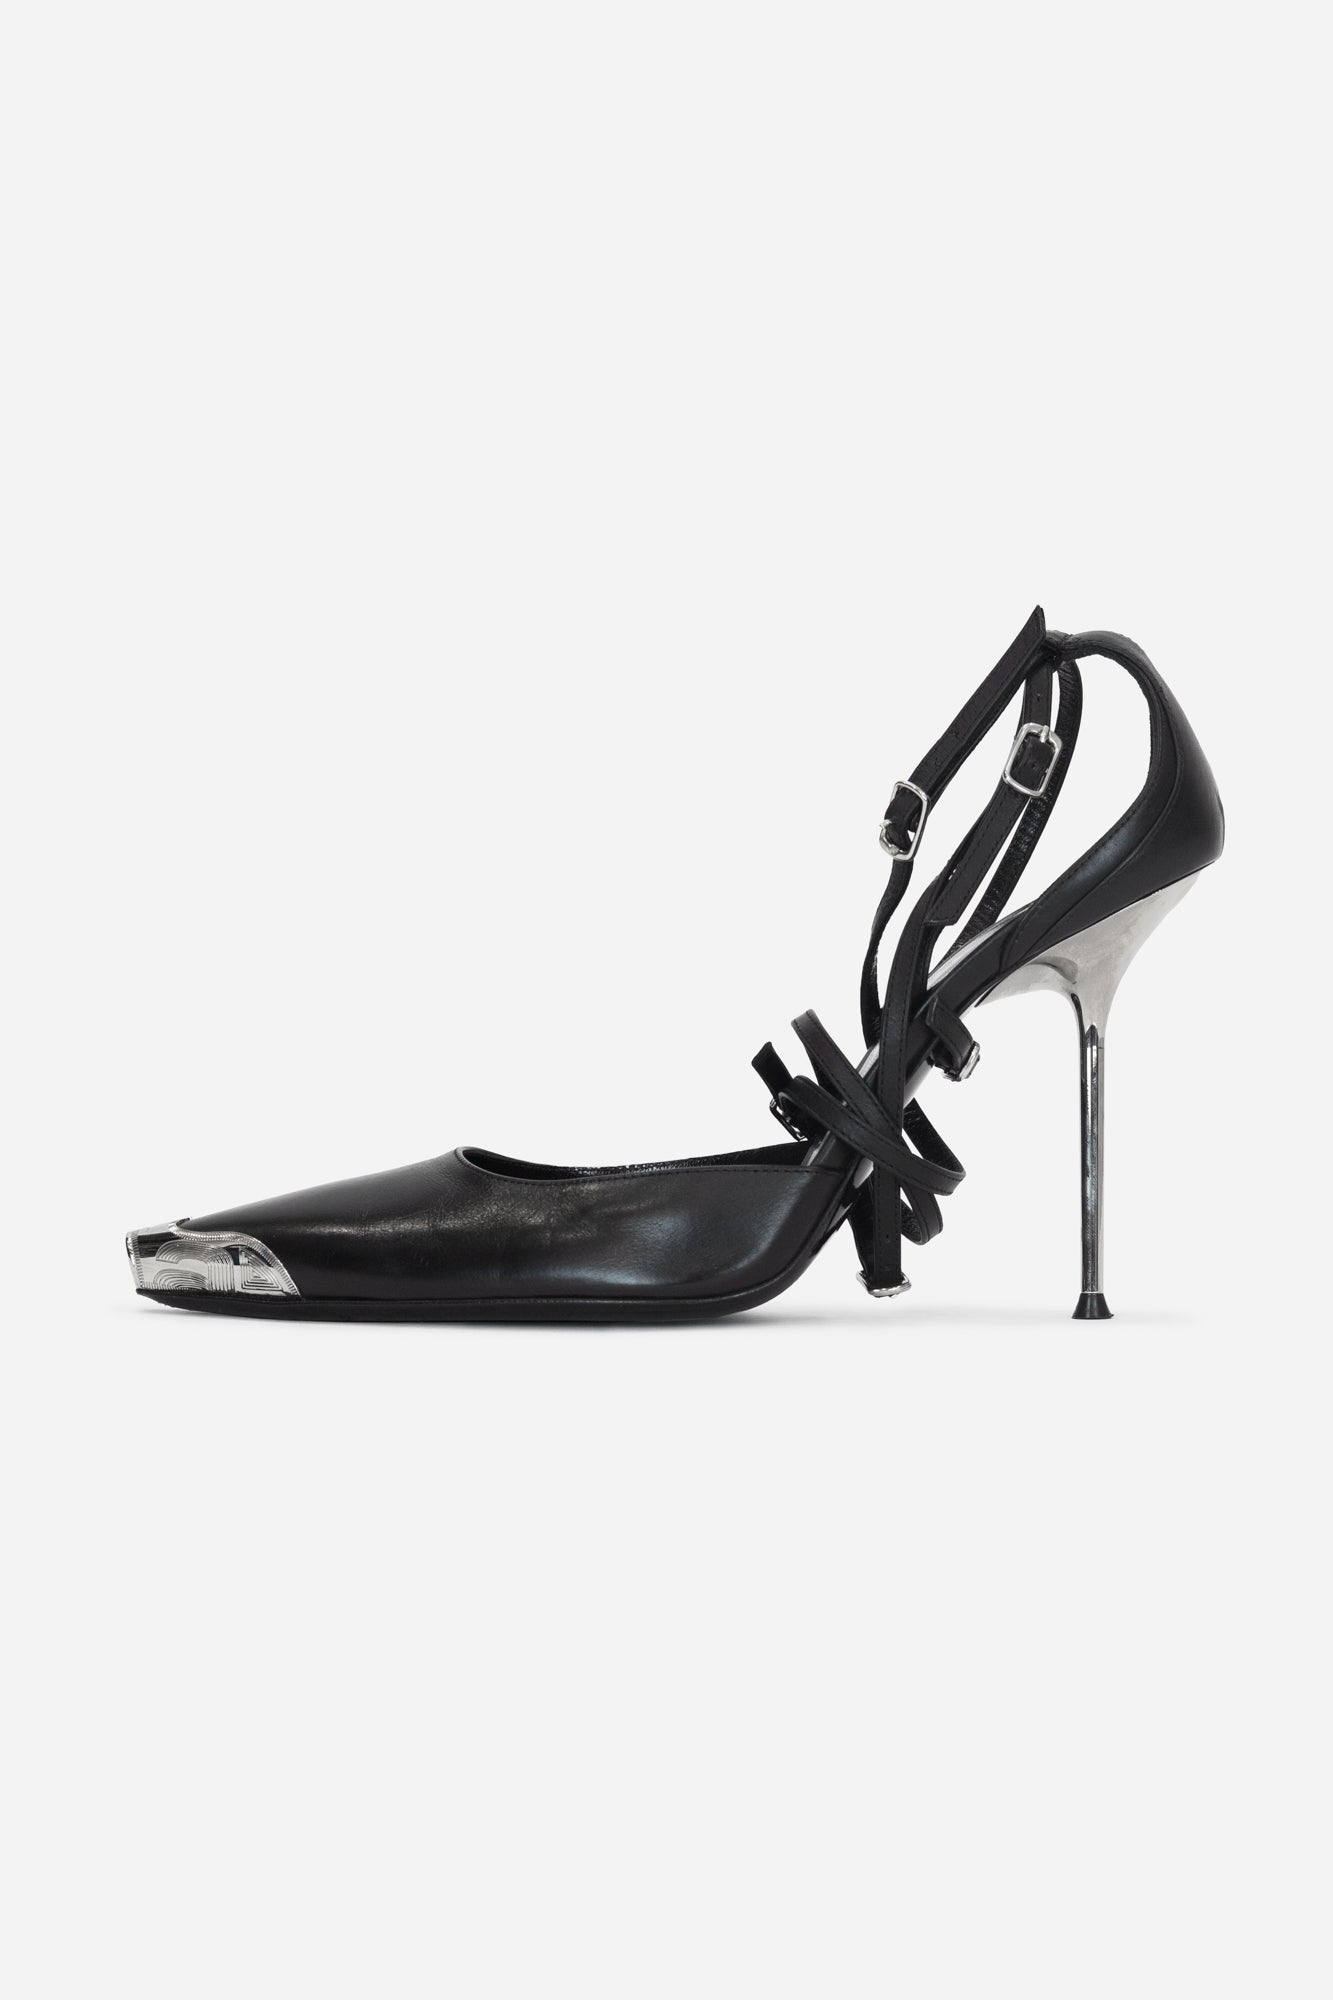 Black Silver Plated Point Toe Heals With Strappy Ankle